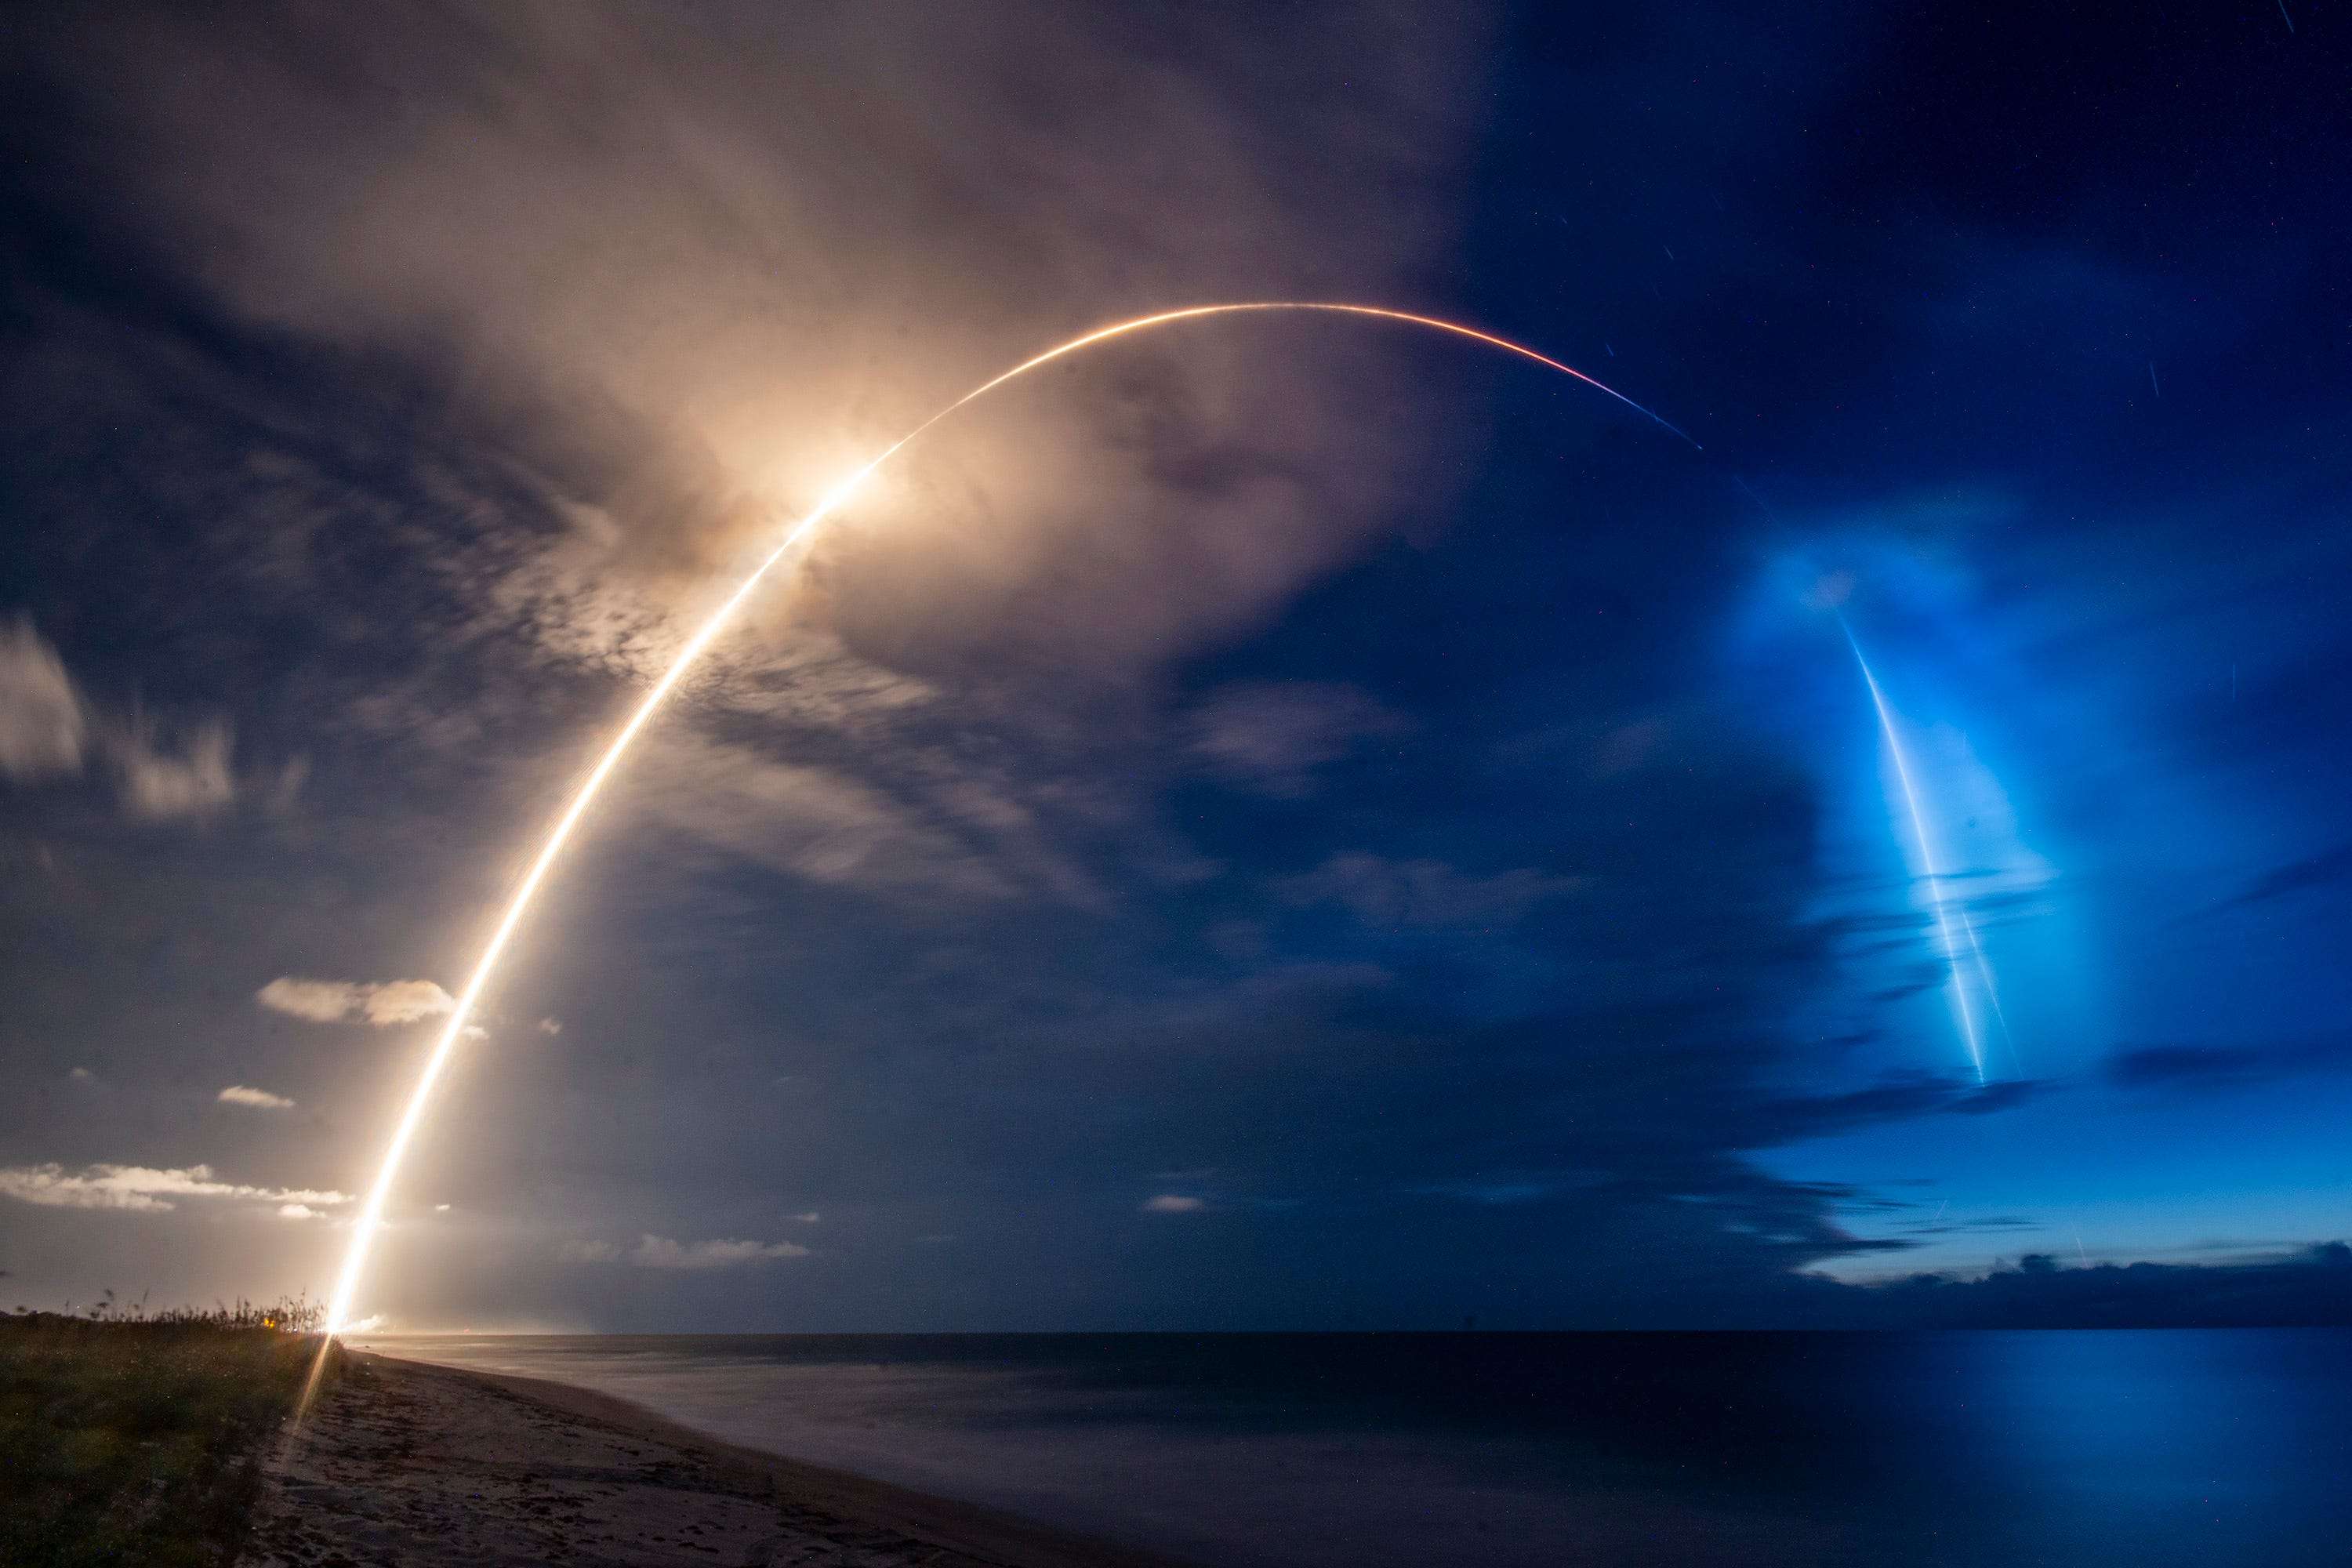 SpaceX's rocket launch of 58 Starlink satellites on Saturday